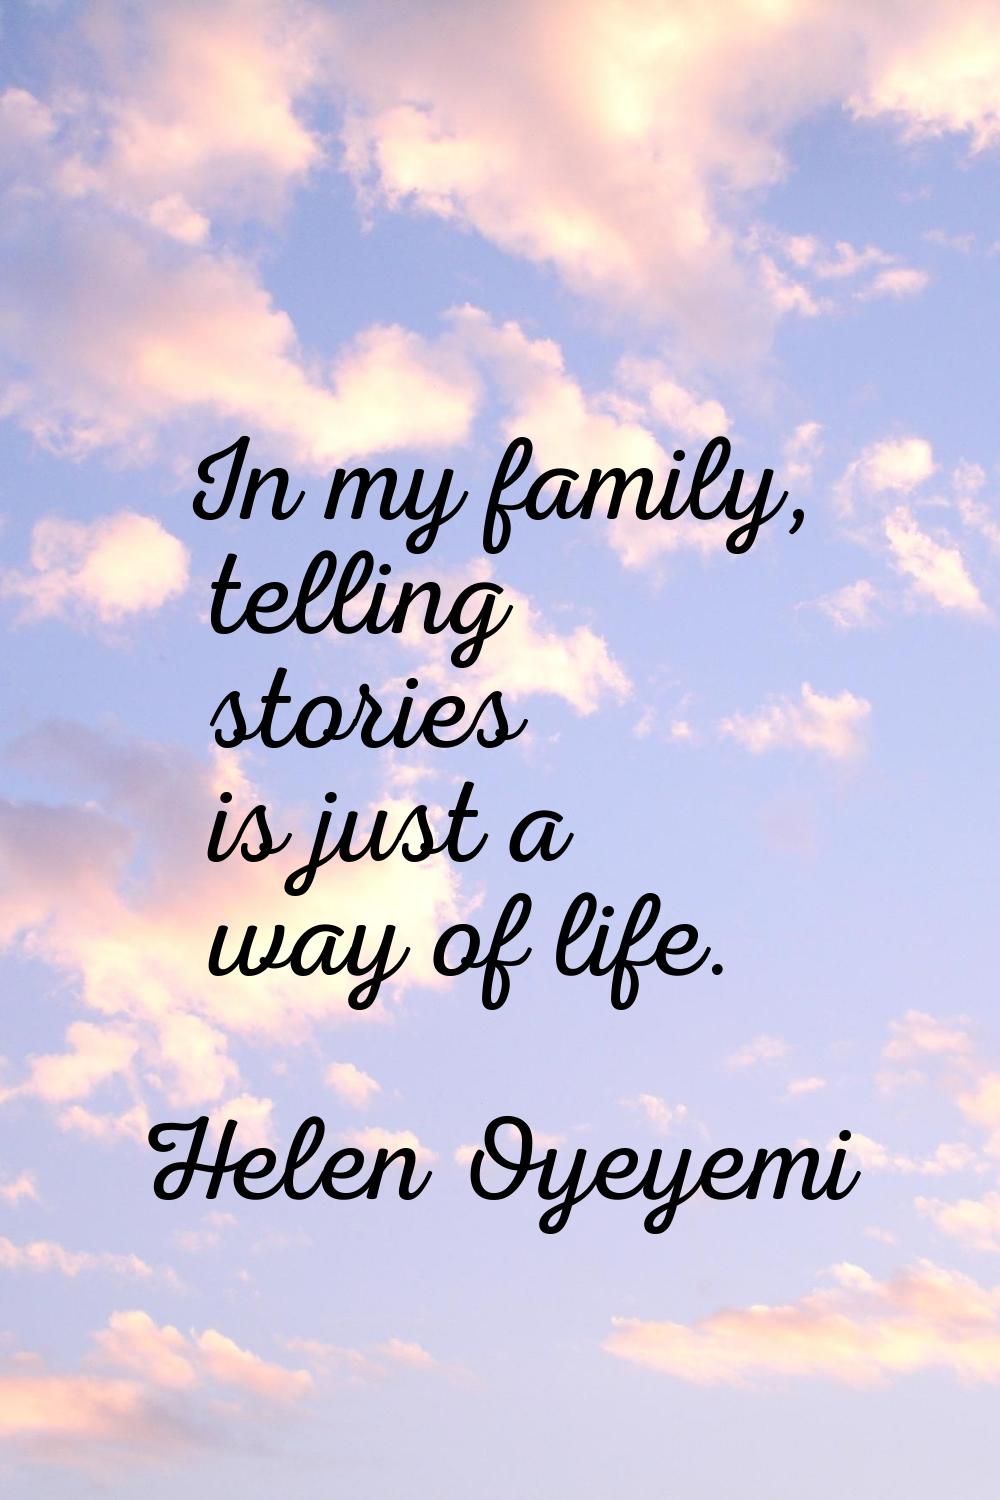 In my family, telling stories is just a way of life.